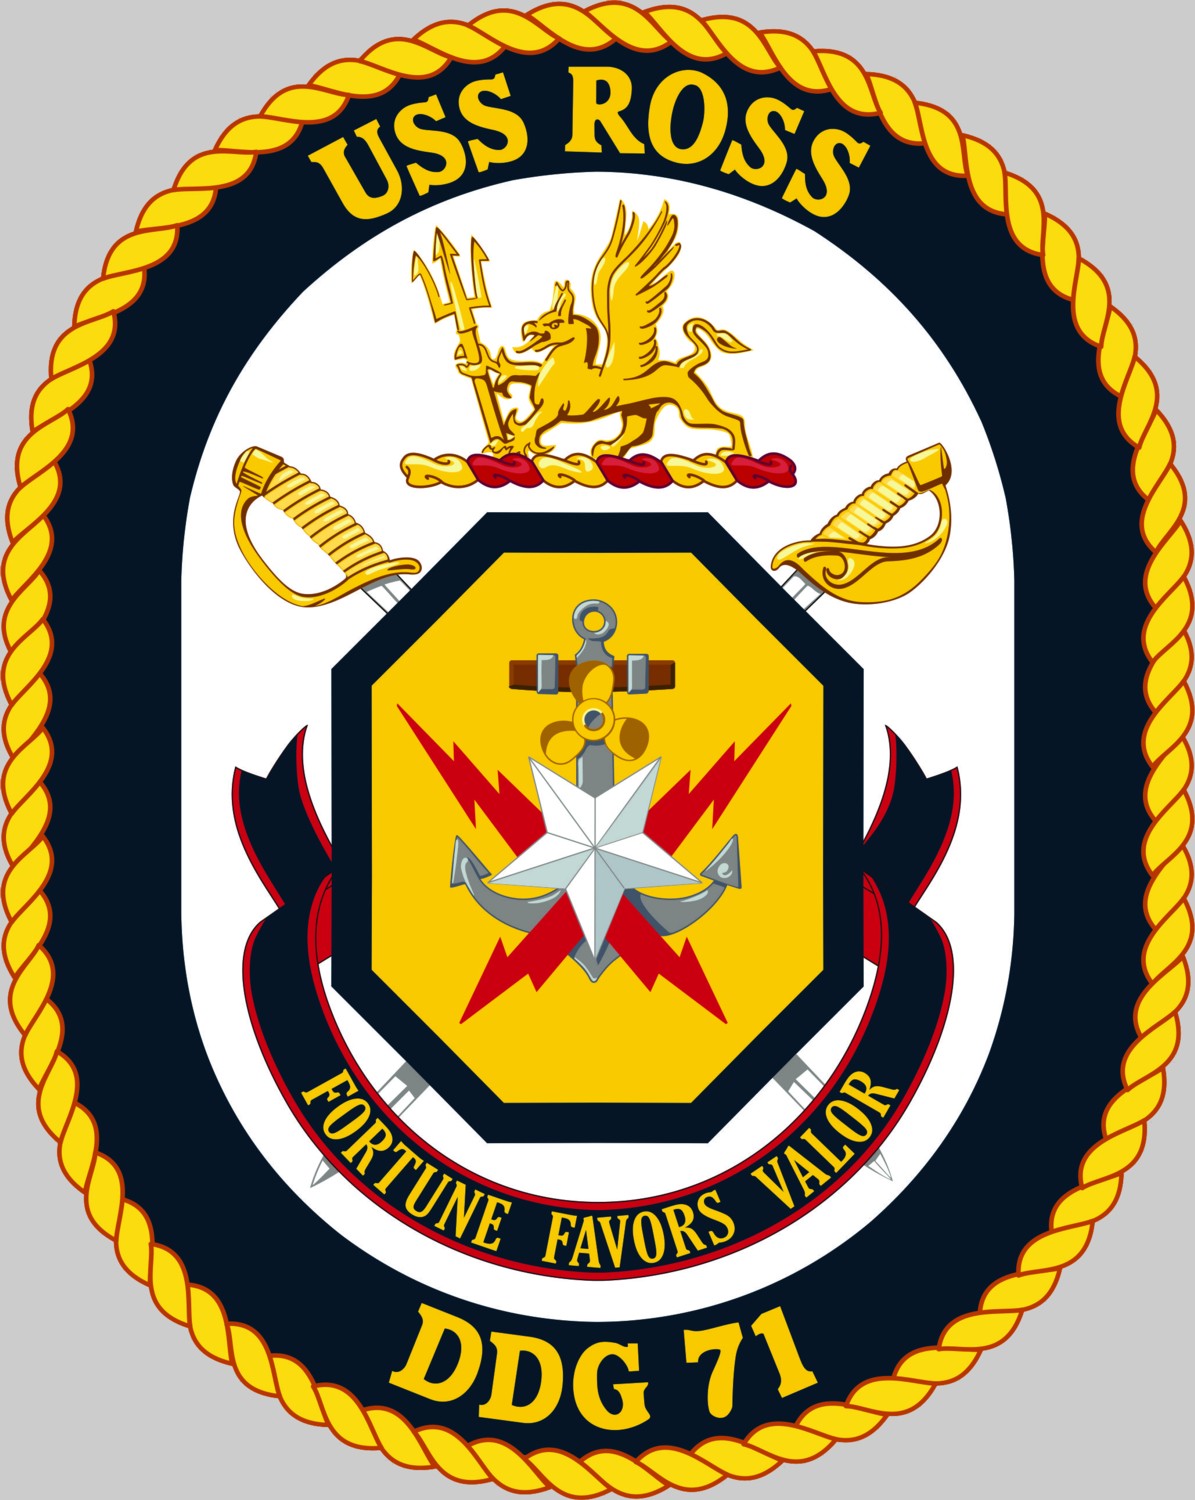 ddg-71 uss ross insignia crest patch badge guided missile destroyer us navy 02x